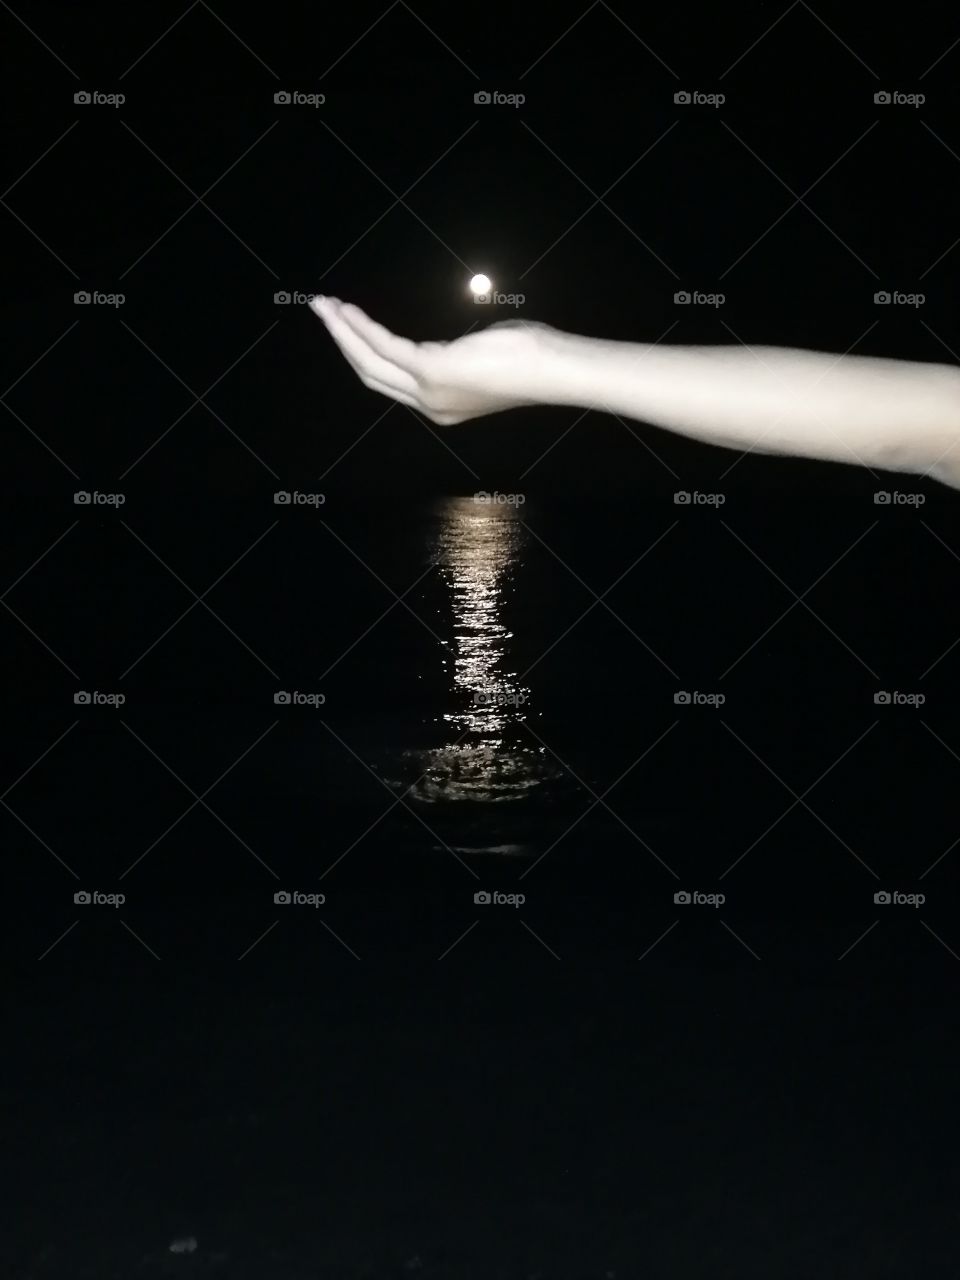 The moon reflected on the water.